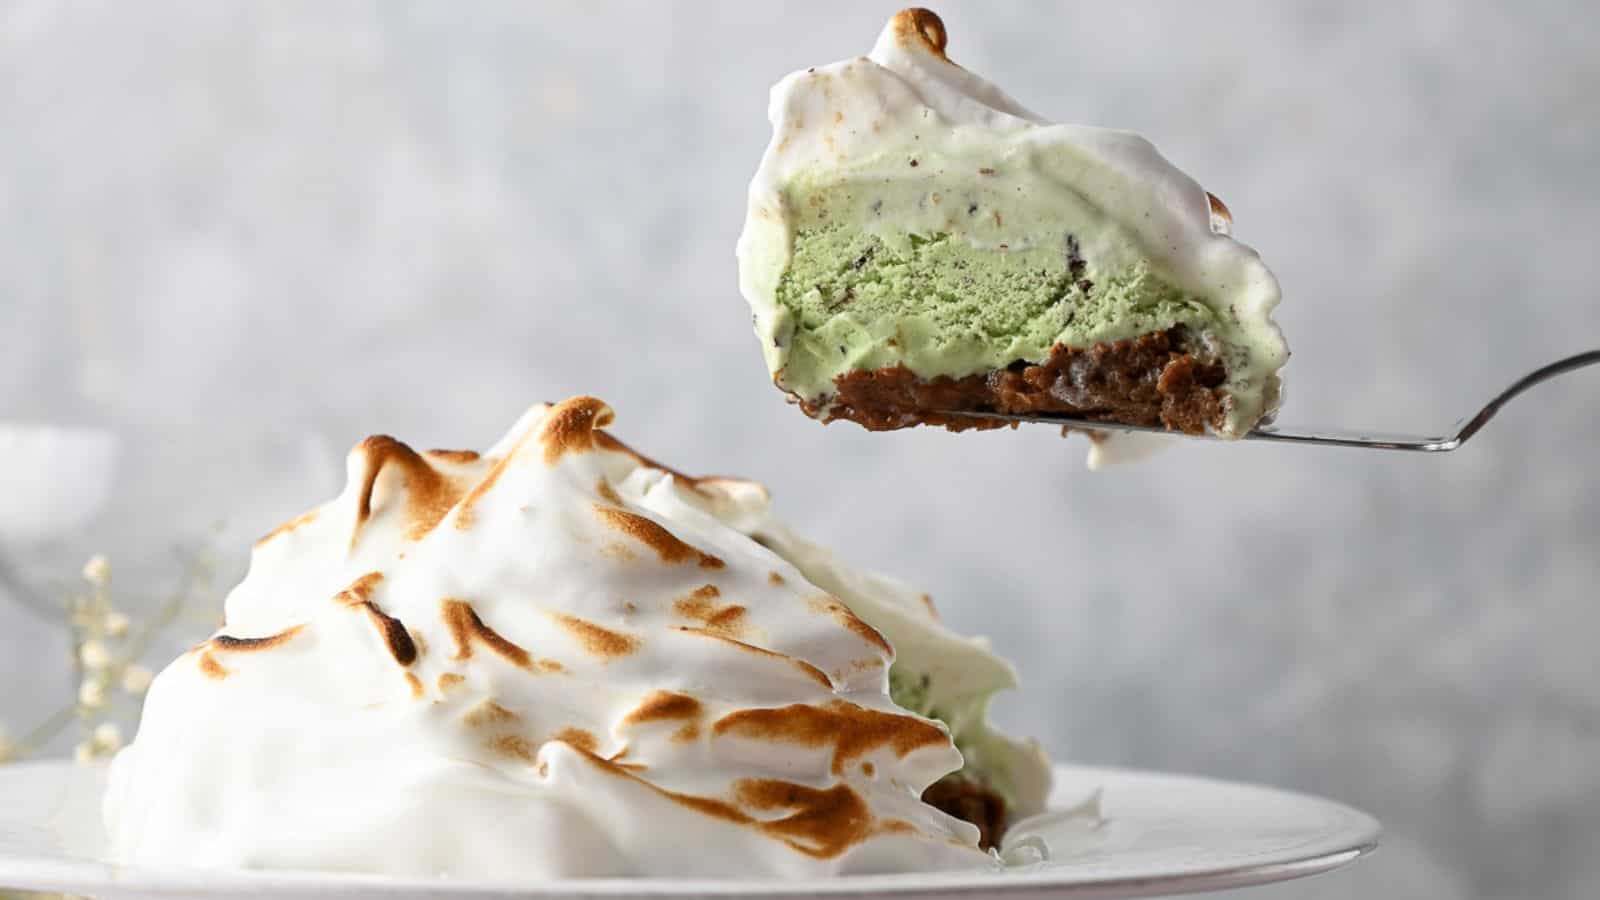 A slice of baked Alaska on a cake slice above the pie with a slice removed.